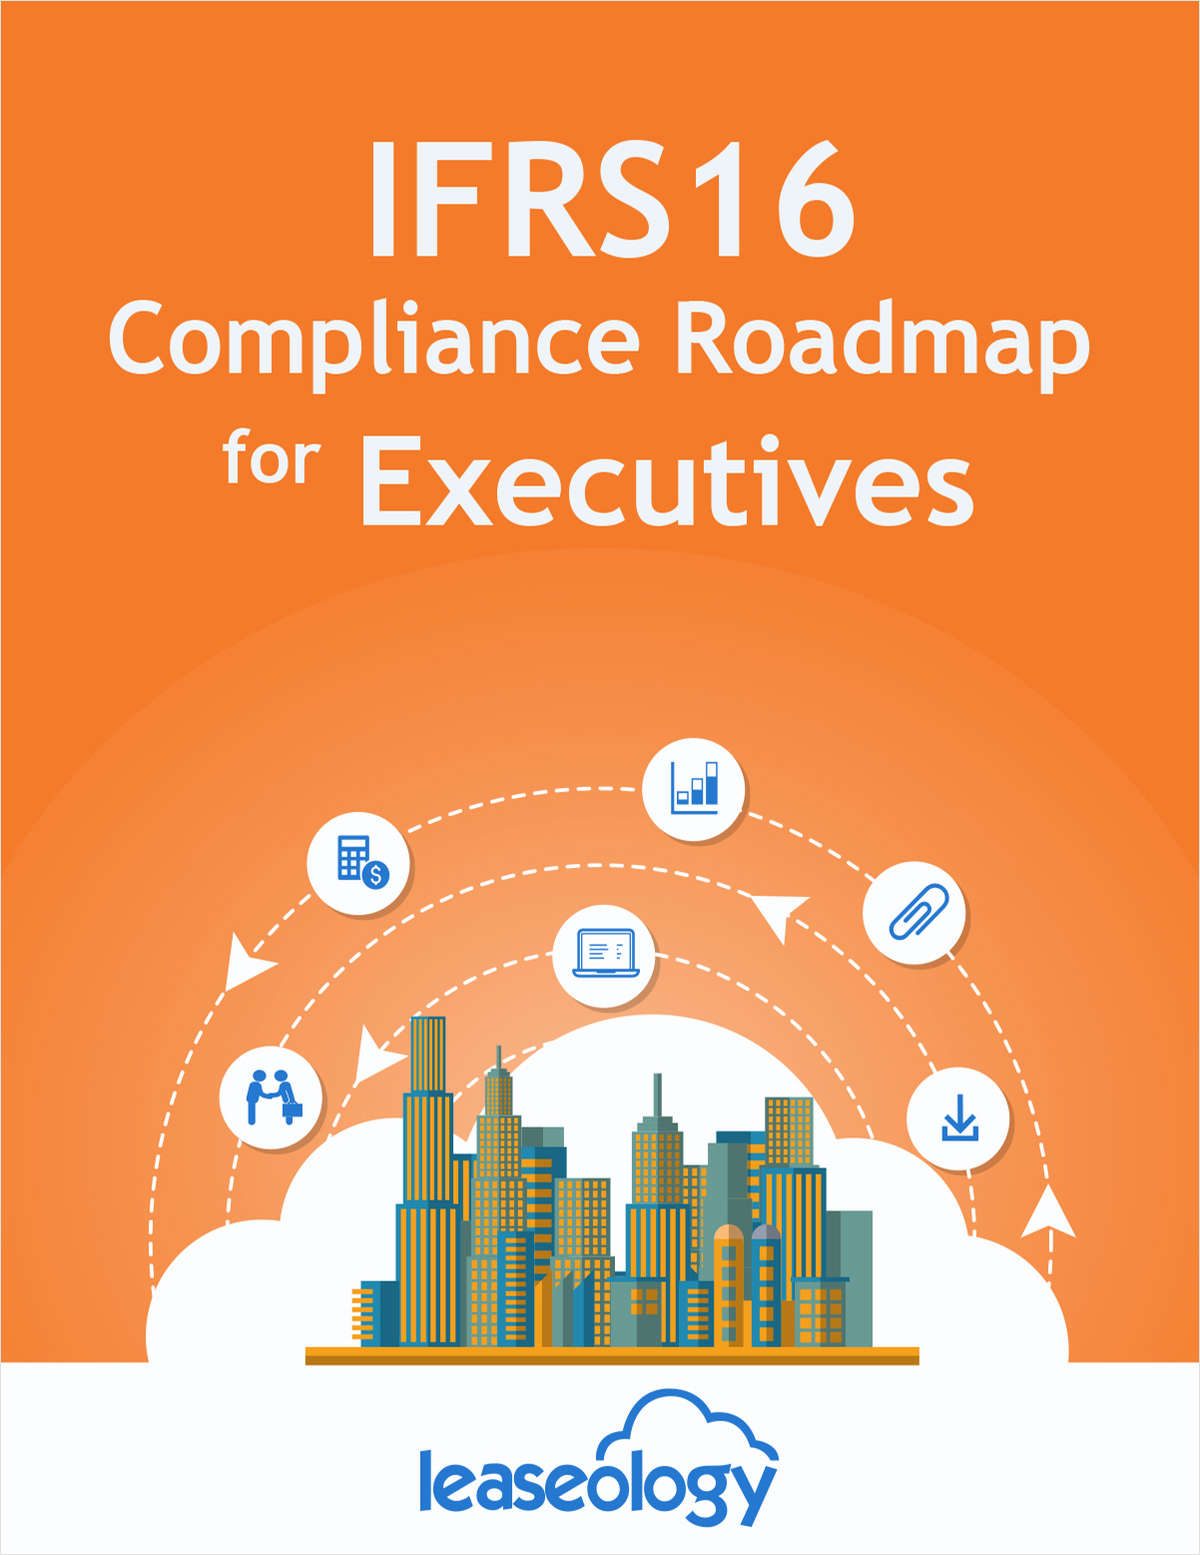 IFRS 16 Compliance Roadmap for Executives